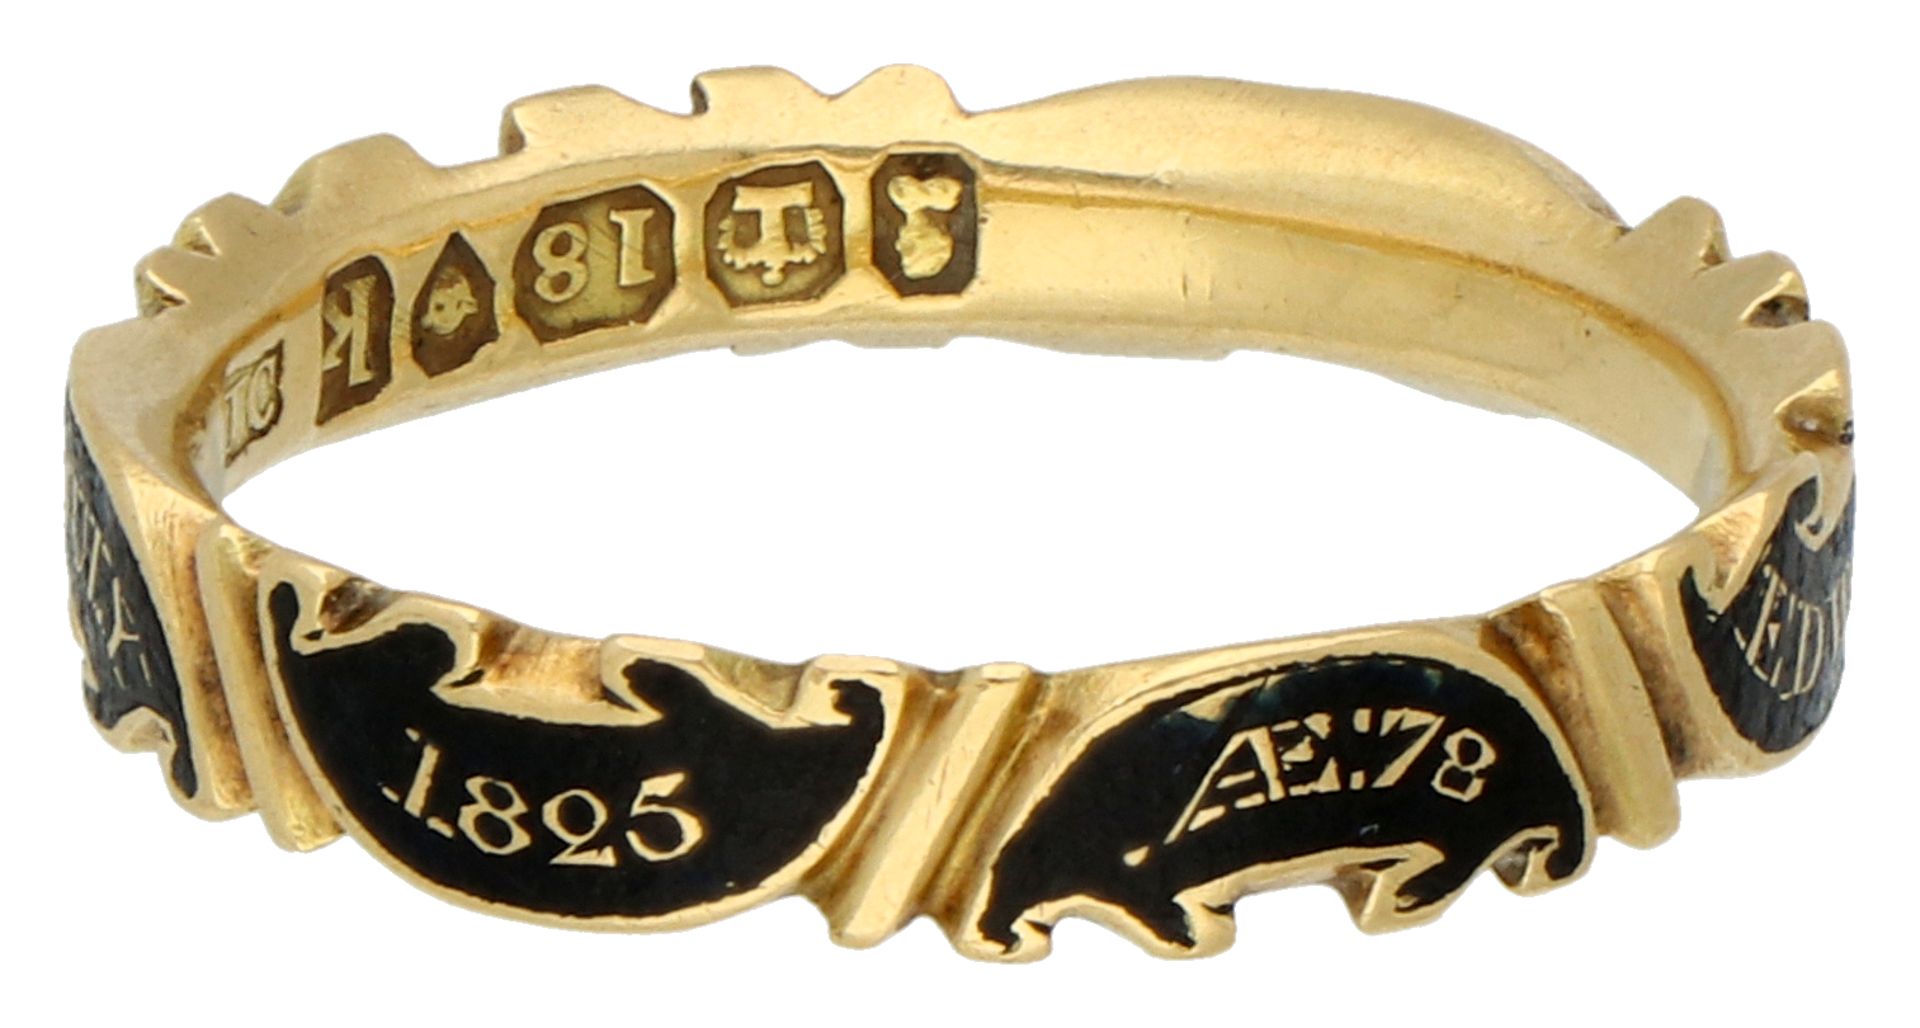 No Reserve - English antique 18K yellow gold memorial ring from 1825. - Image 3 of 4